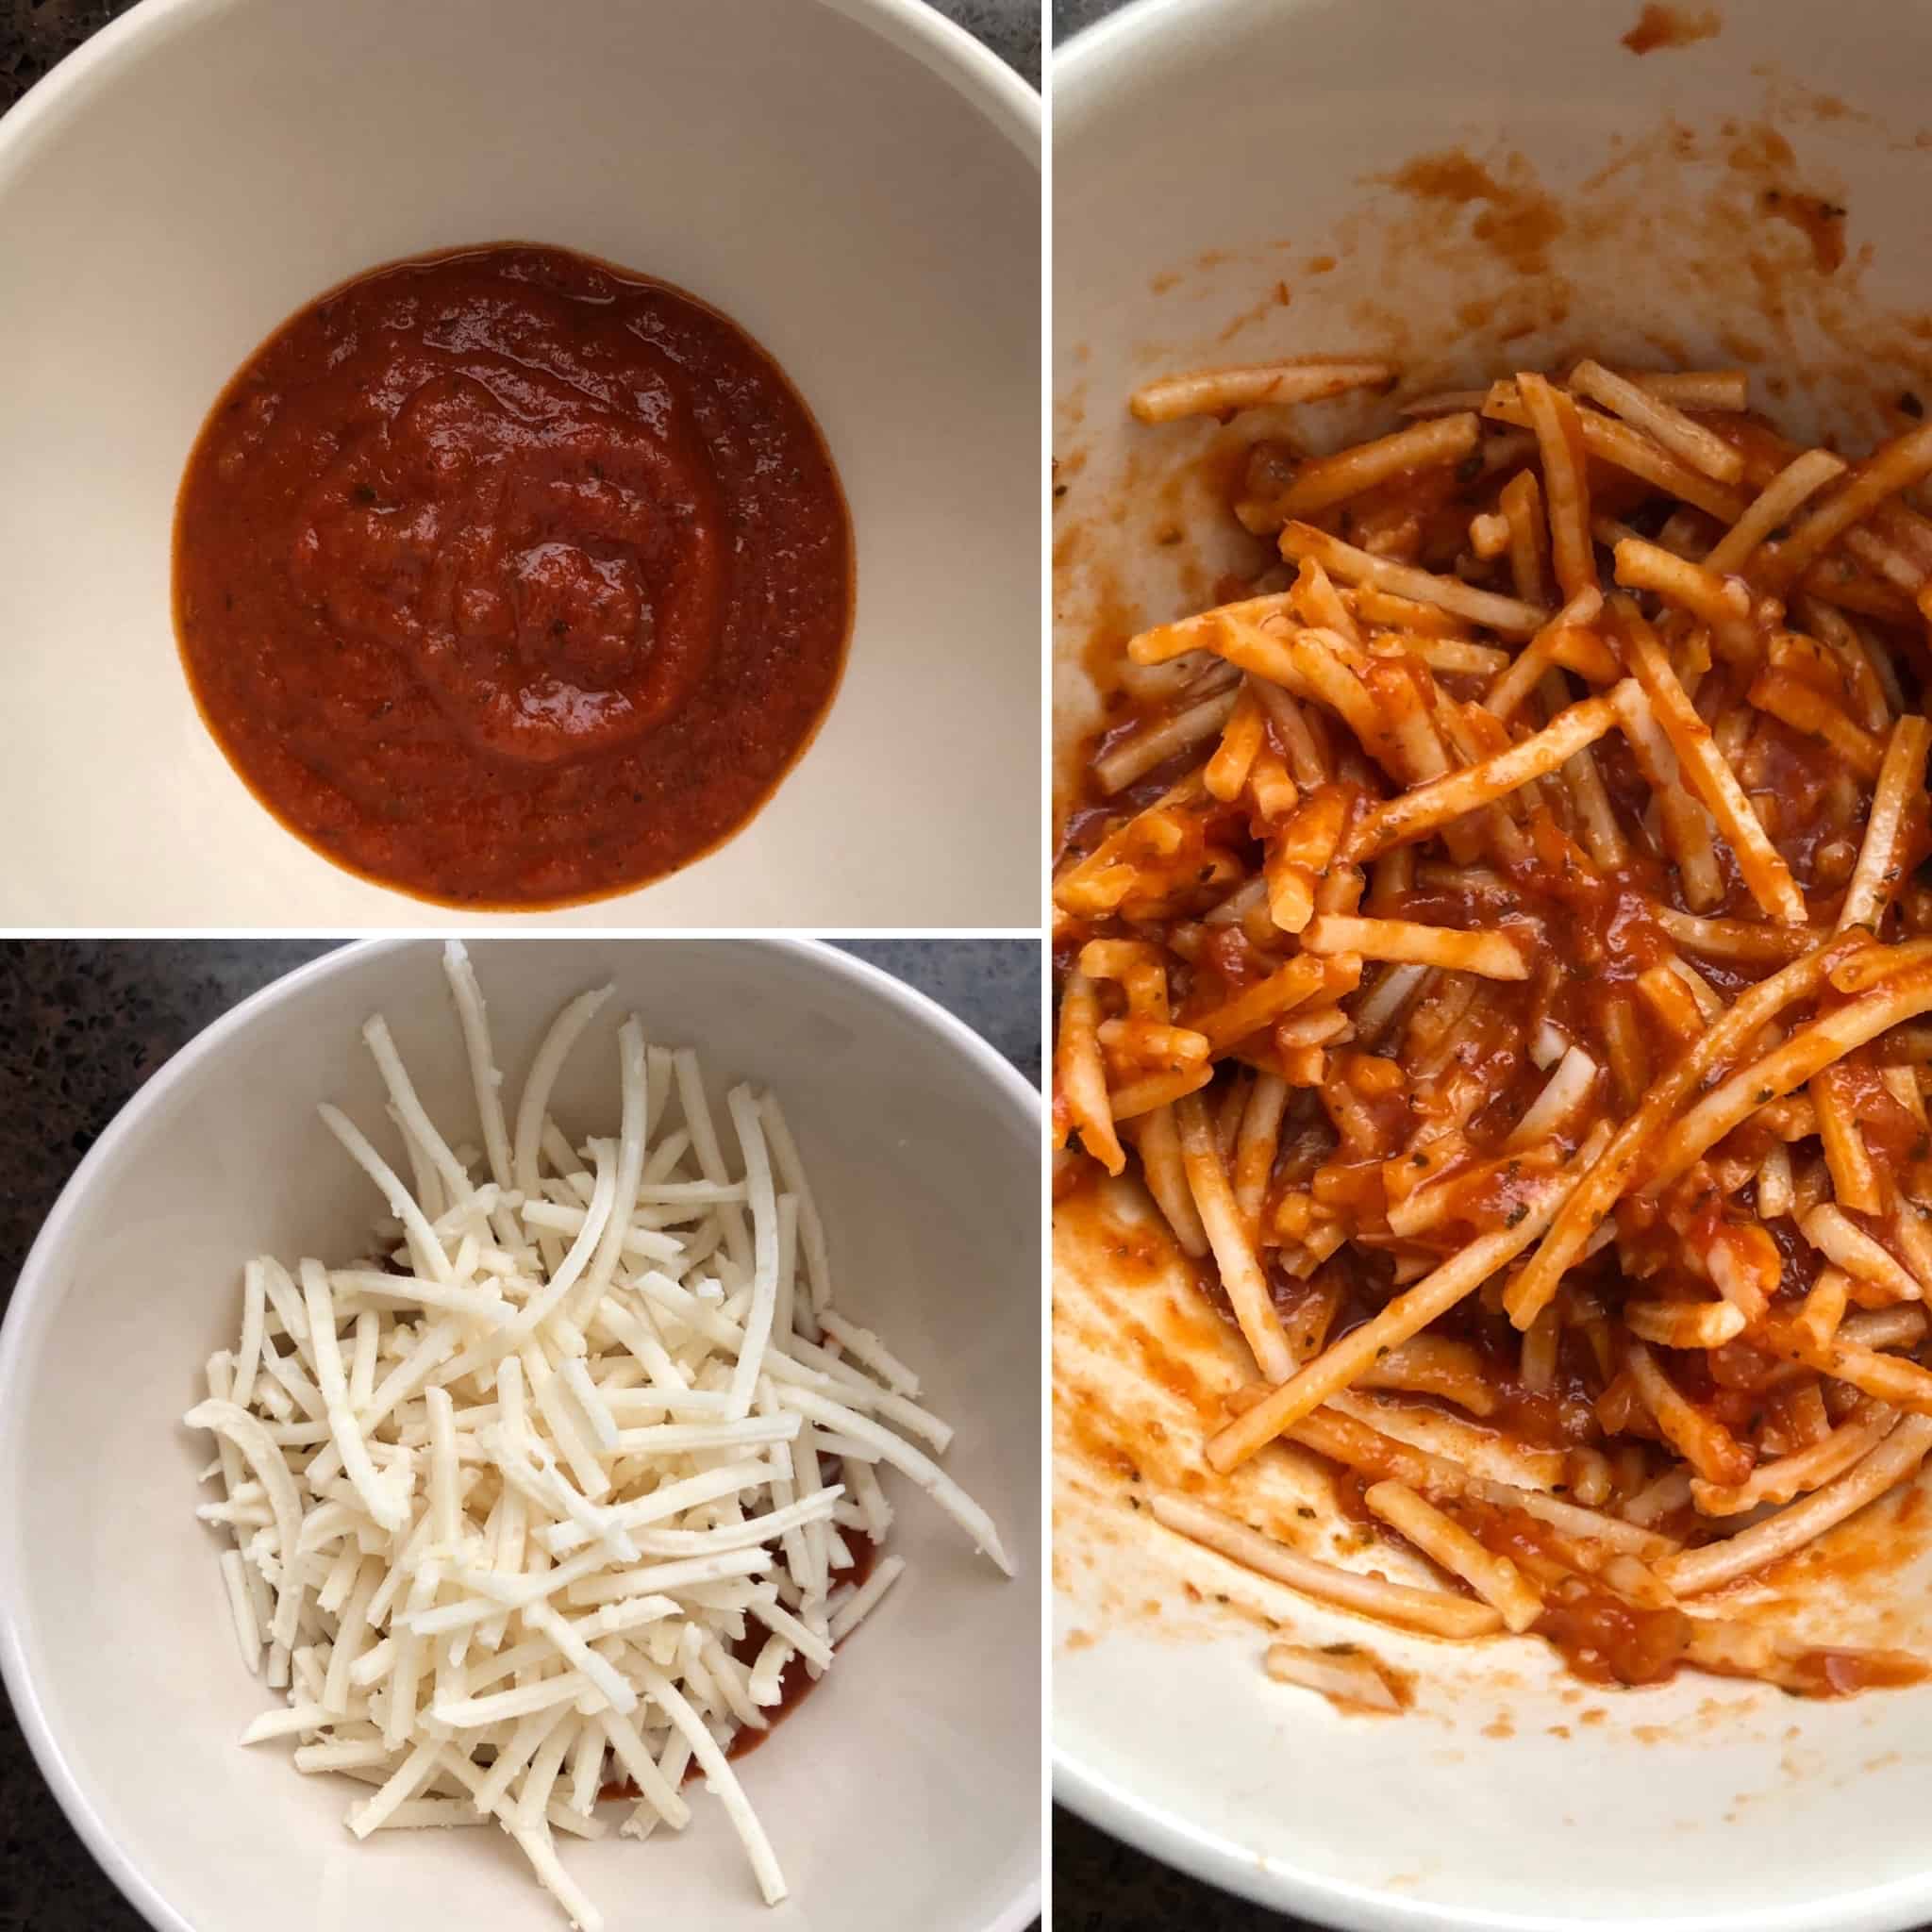 Bowl with Tomato sauce and grated cheese mixed in